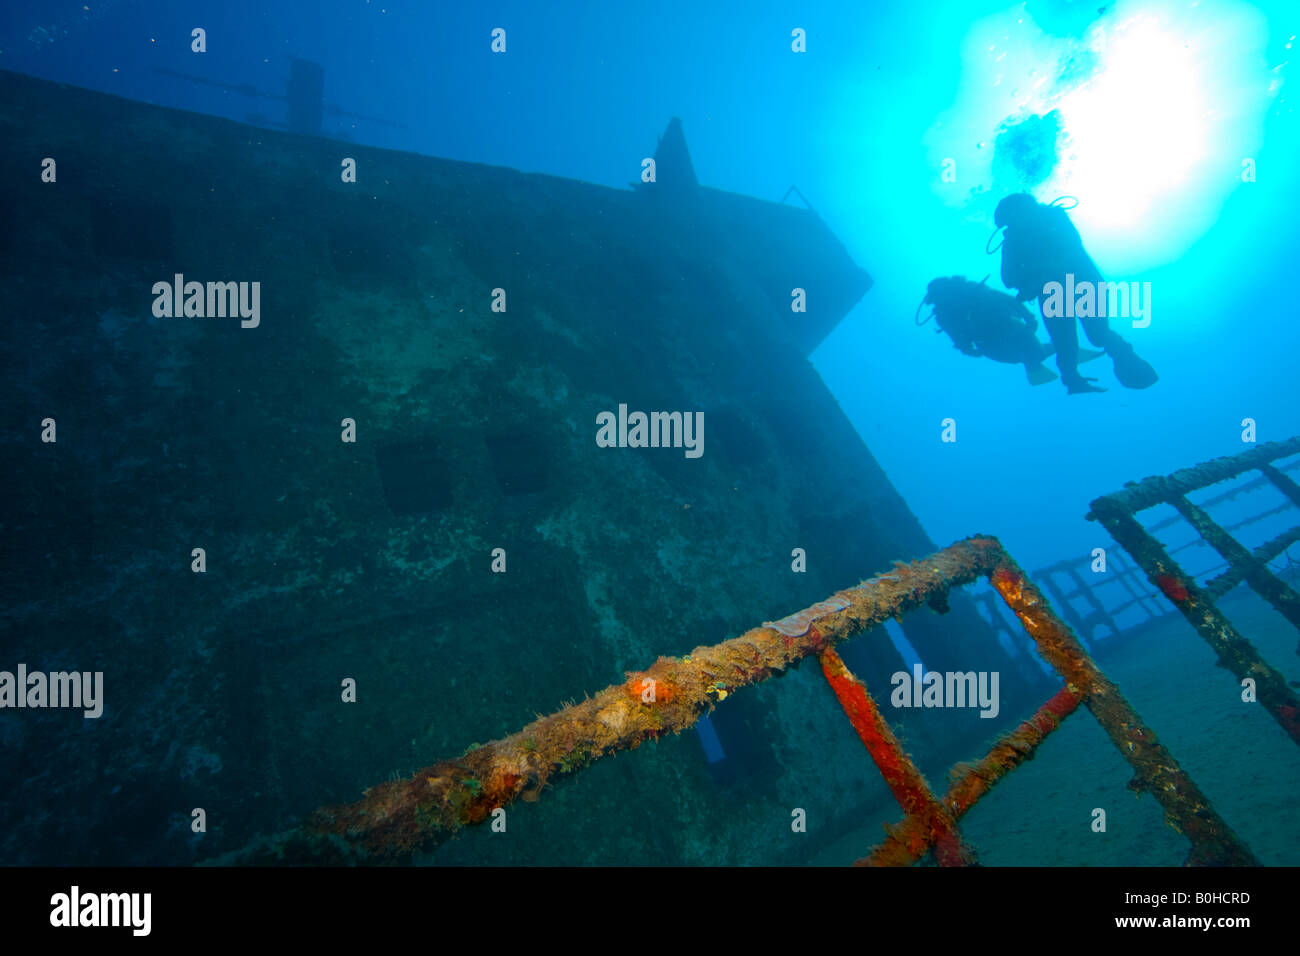 Odyssey shipwreck, 91 meters, sunk in 2002 to serve as a tourist attraction for scuba divers, Roatan, Honduras, Central America Stock Photo